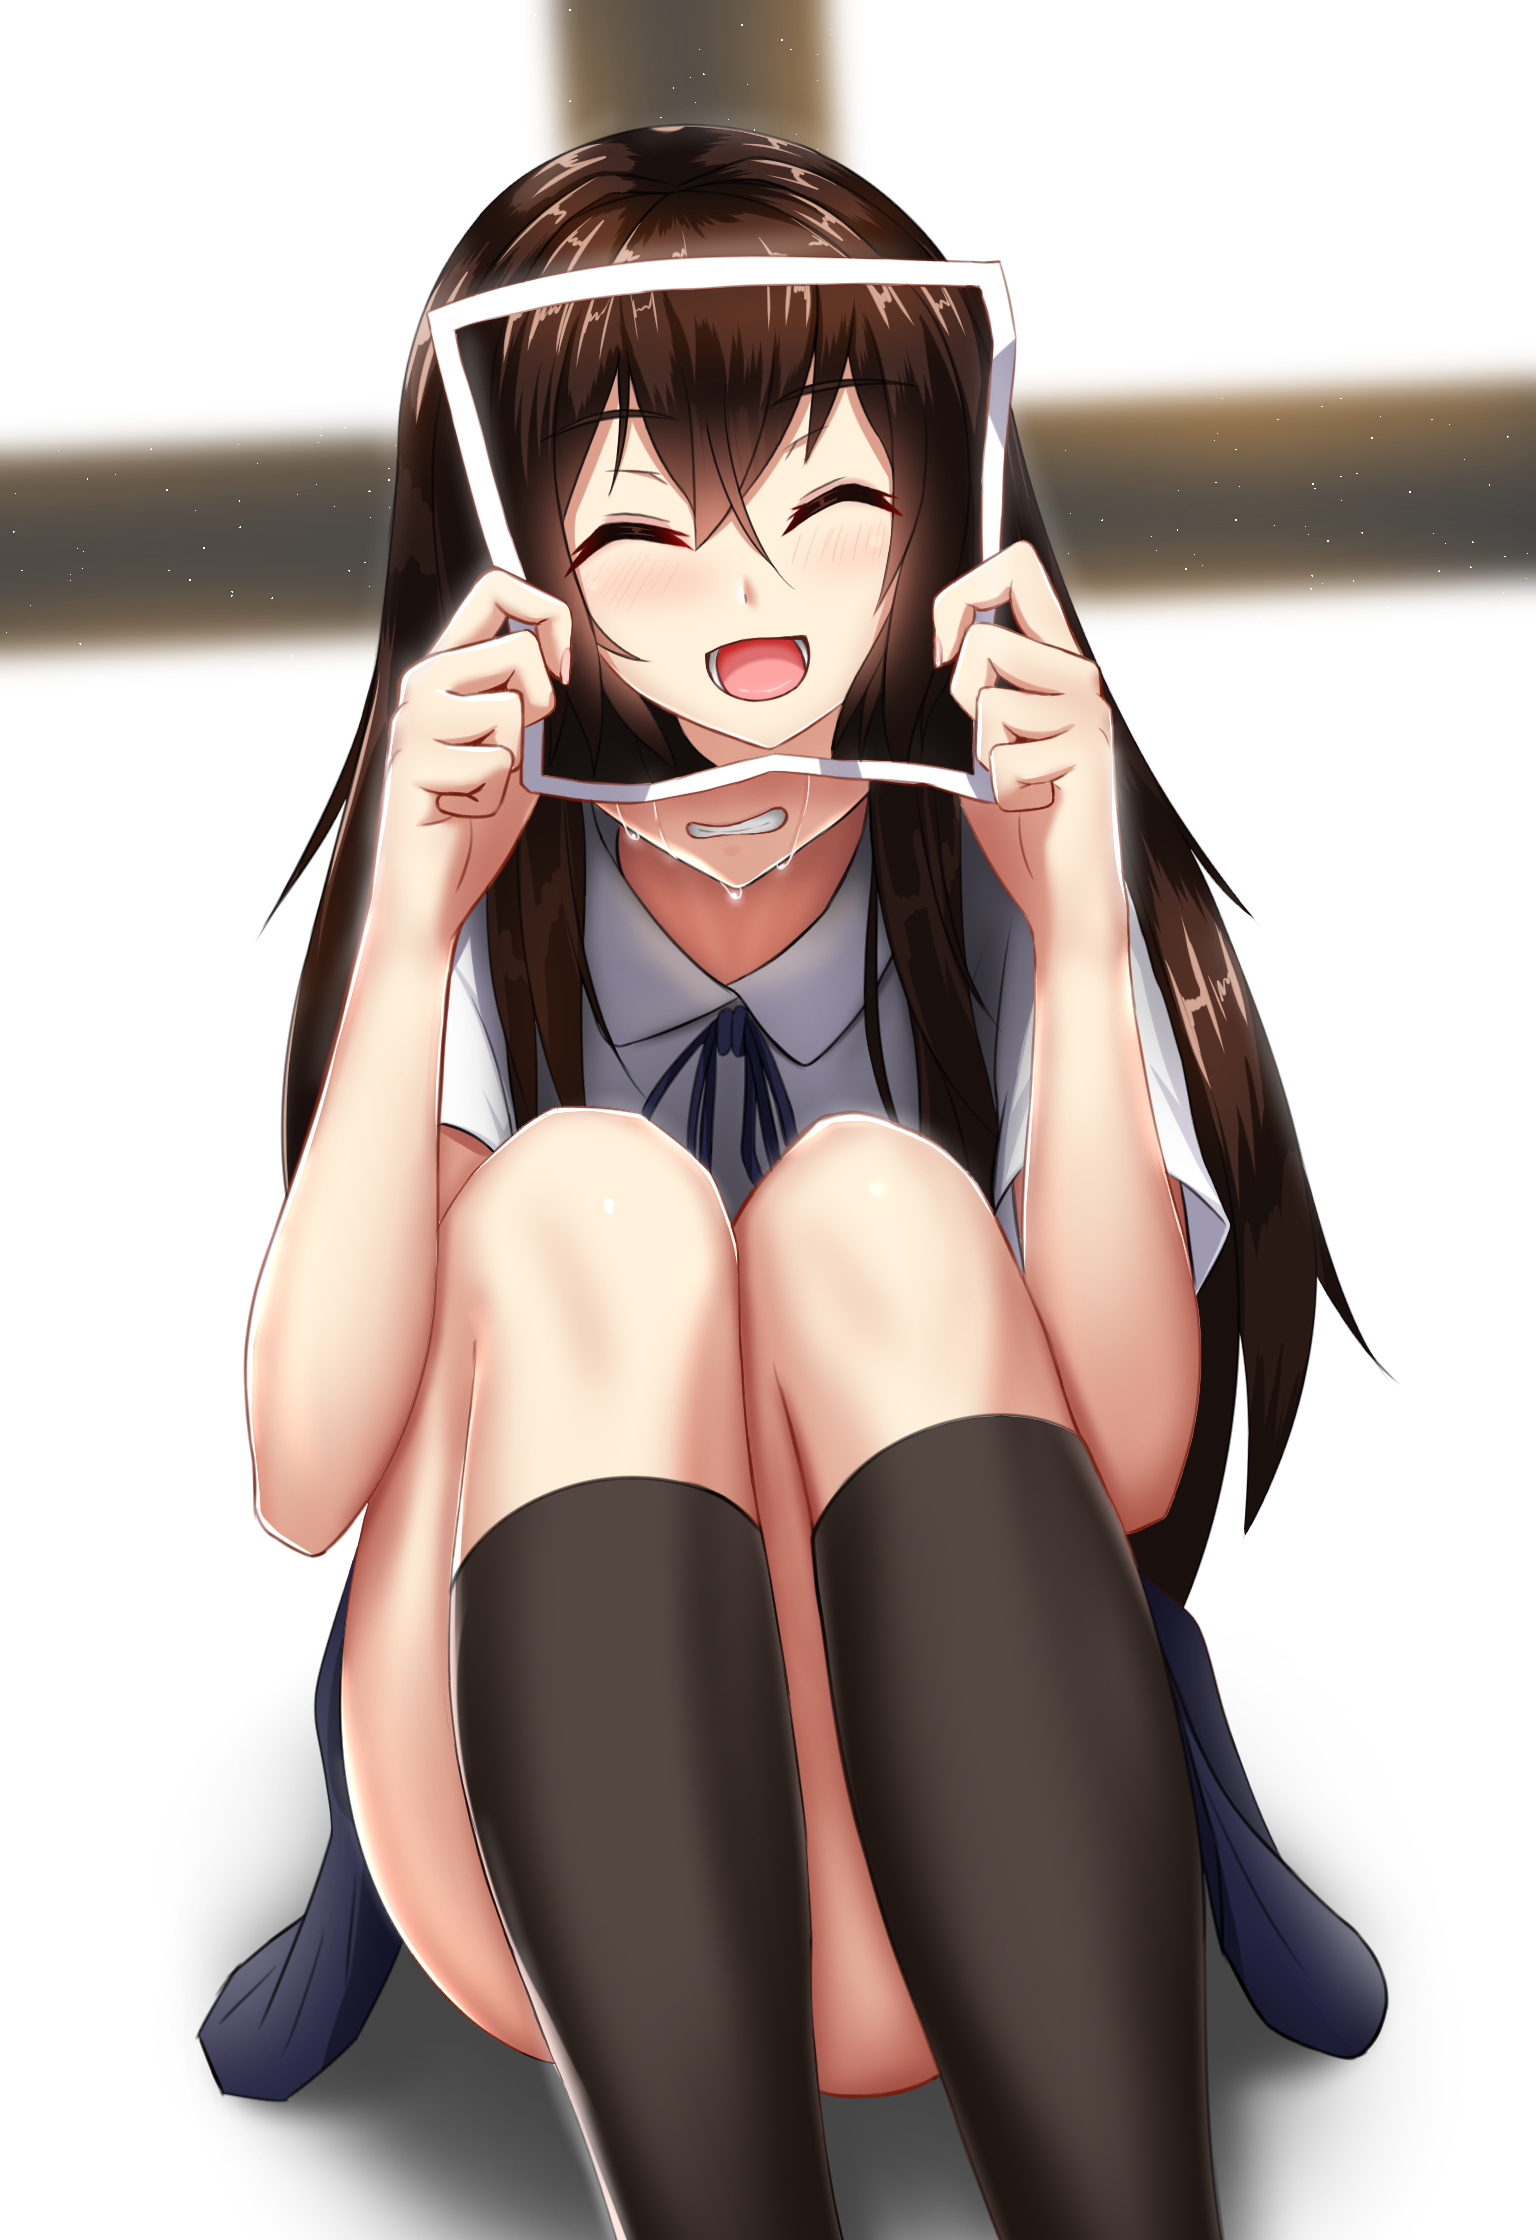 Anime Anime Girls Vertical Crying Tears Long Hair Brunette Closed Eyes Open Mouth Hiding Covered Fac 1536x2240